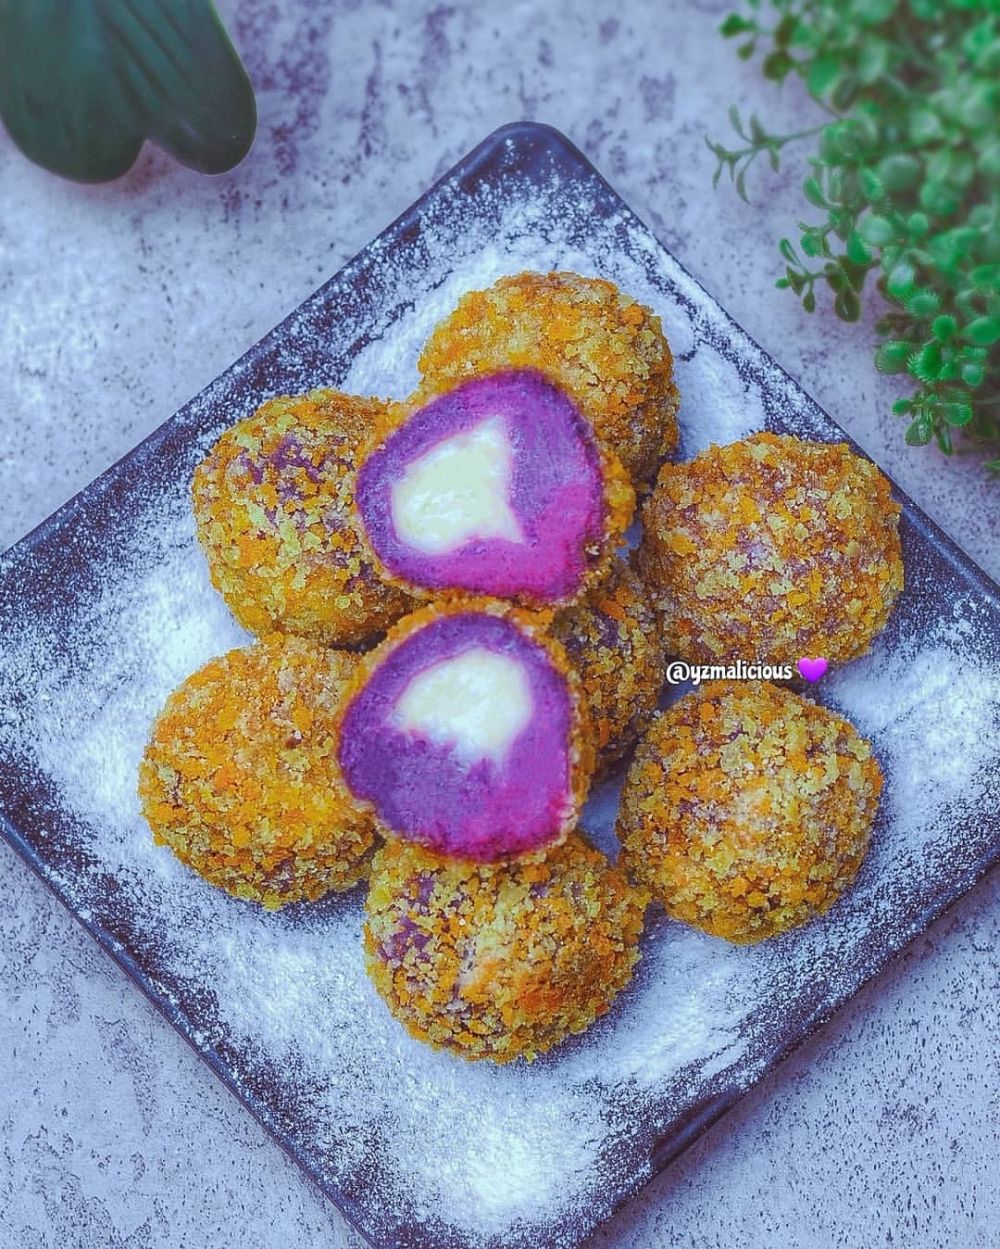 13 Recipes for fried purple sweet potato, practical, delicious, & suitable as a snack